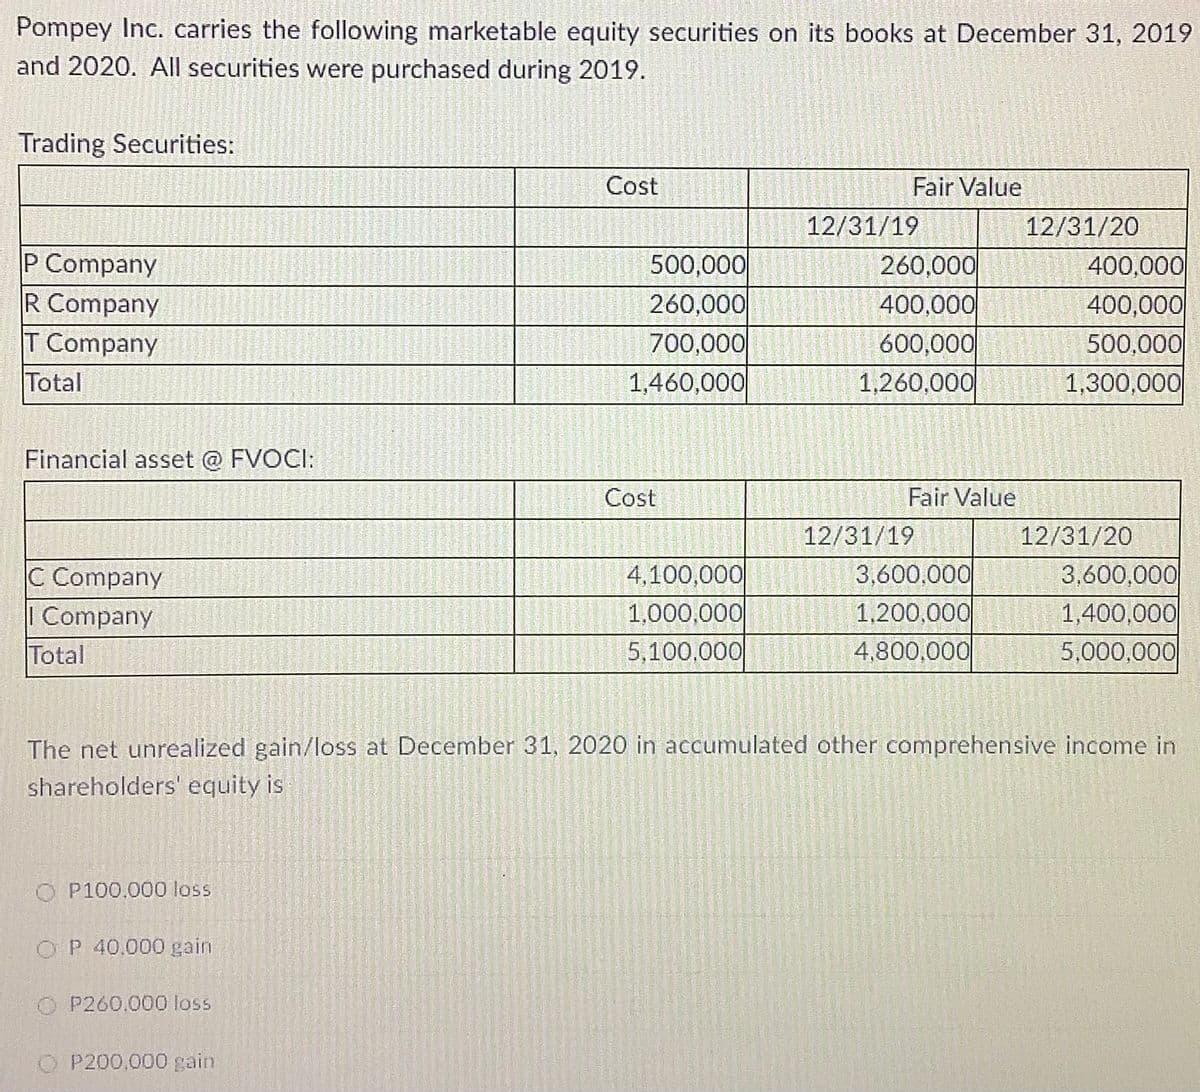 Pompey Inc. carries the following marketable equity securities on its books at December 31, 2019
and 2020. All securities were purchased during 2019.
Trading Securities:
Cost
Fair Value
12/31/19
12/31/20
P Company
R Company
T Company
Total
500,000
260,000
700,000
1,460,000
260,000
400,000
600,000
1,260,000
400,000|
400,000
500,000
1,300,000
Financial asset @ FVOCI:
Cost
Fair Value
12/31/19
12/31/20
3,600,000
C Company
| Company
Total
4,100,000
1,000,000
5,100,000
1,200,000
4,800,000
3,600,000
1,400,000
5,000,000
The net unrealized gain/loss at December 31, 2020 in accumulated other comprehensive income in
shareholders' equity is
O P100.000 loss
OP 40.000 gain
P260,000 loss
O P200,000 gain
